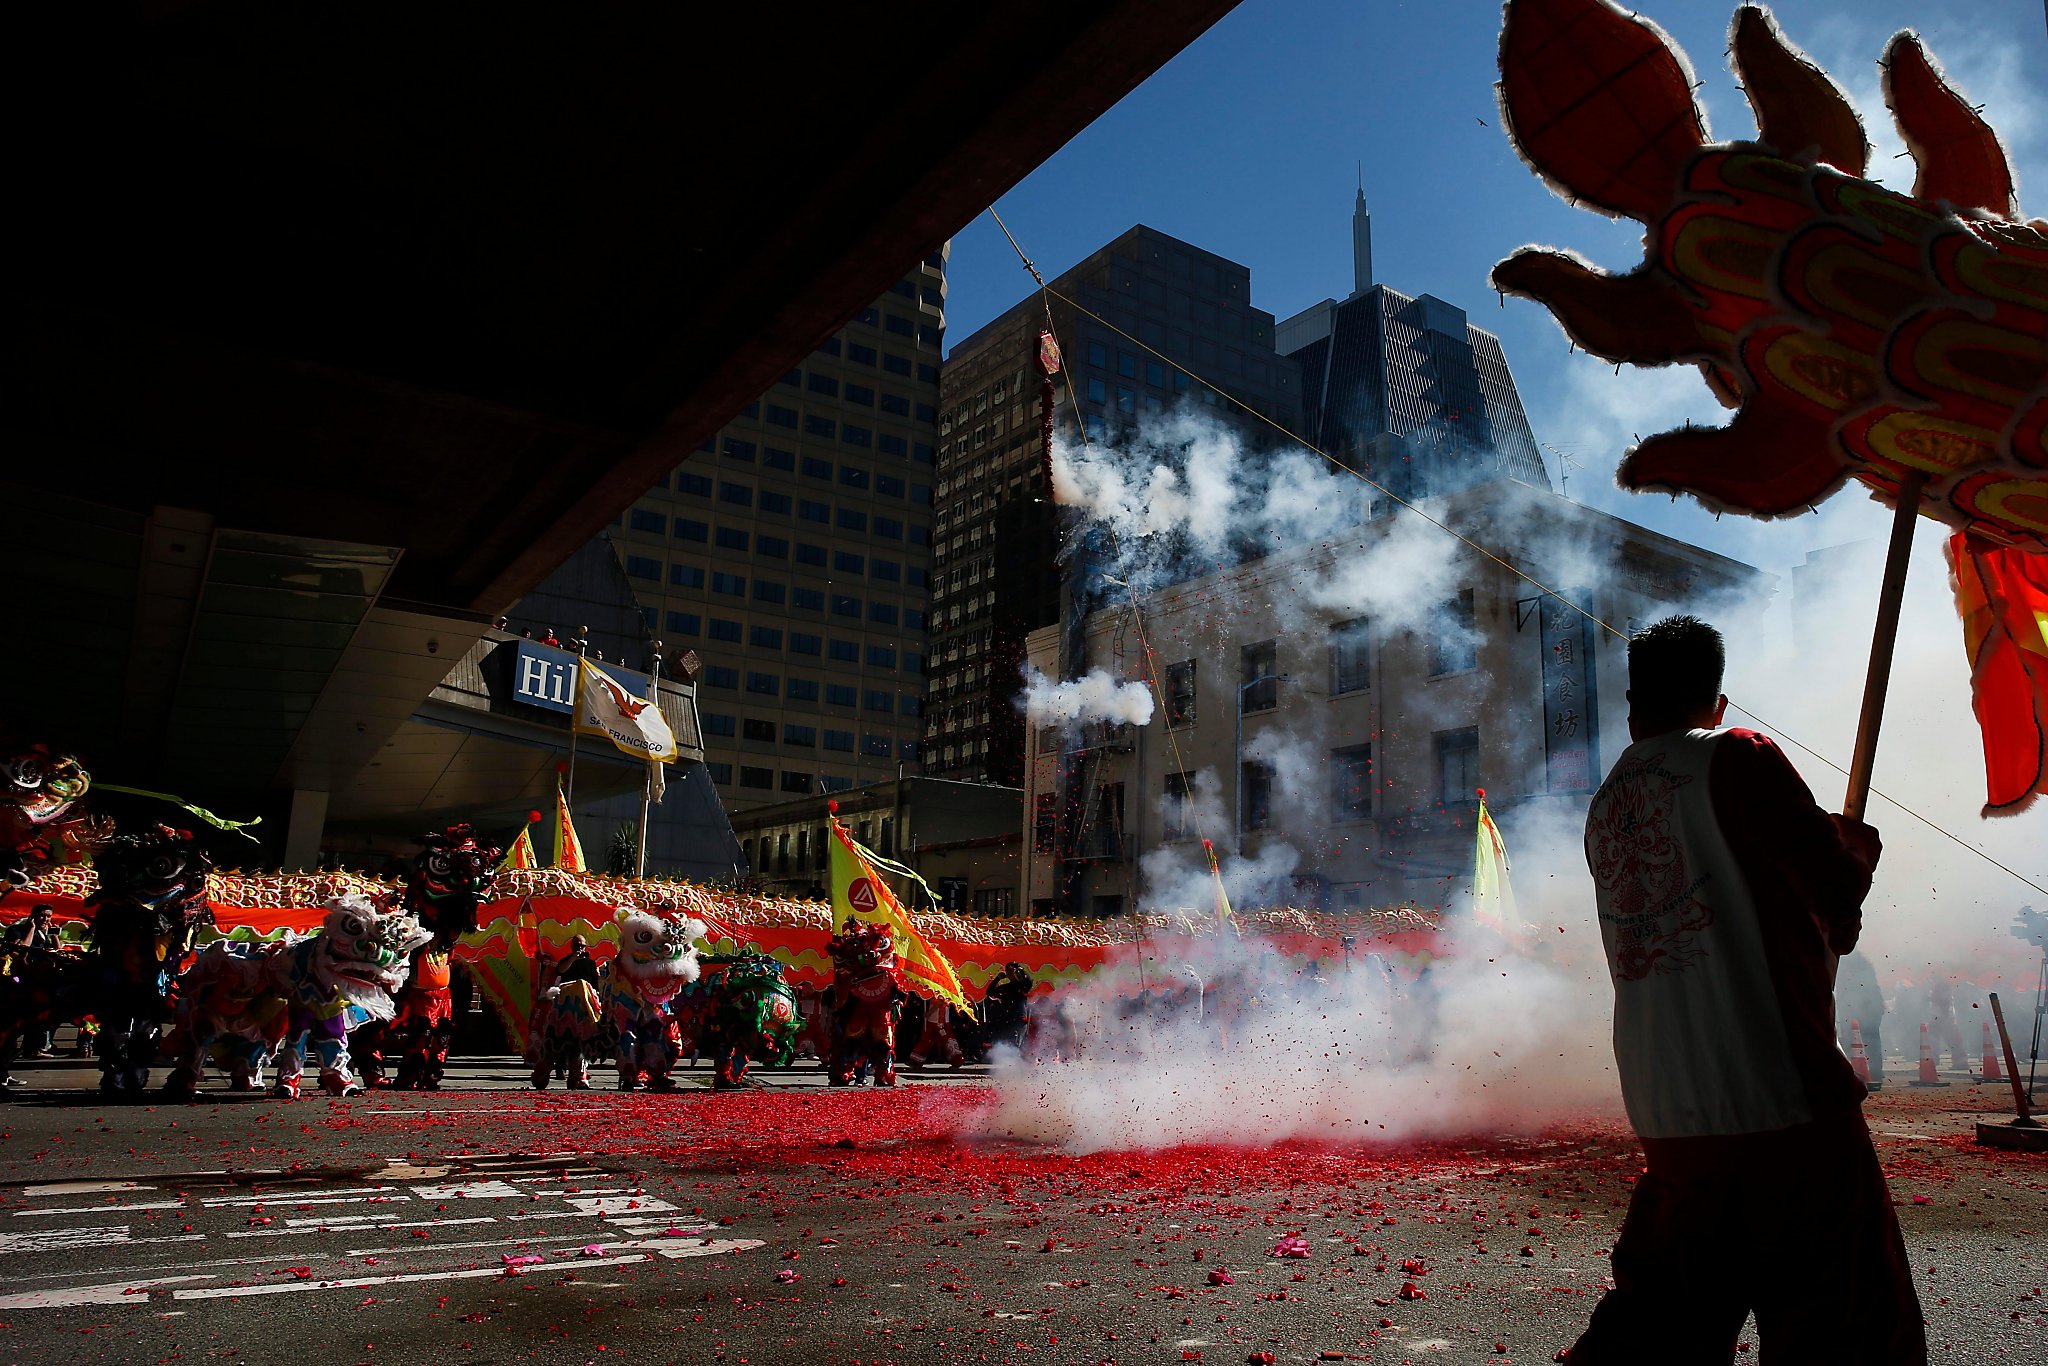 Dragon comes to life in San Francisco on first day of Lunar New Year